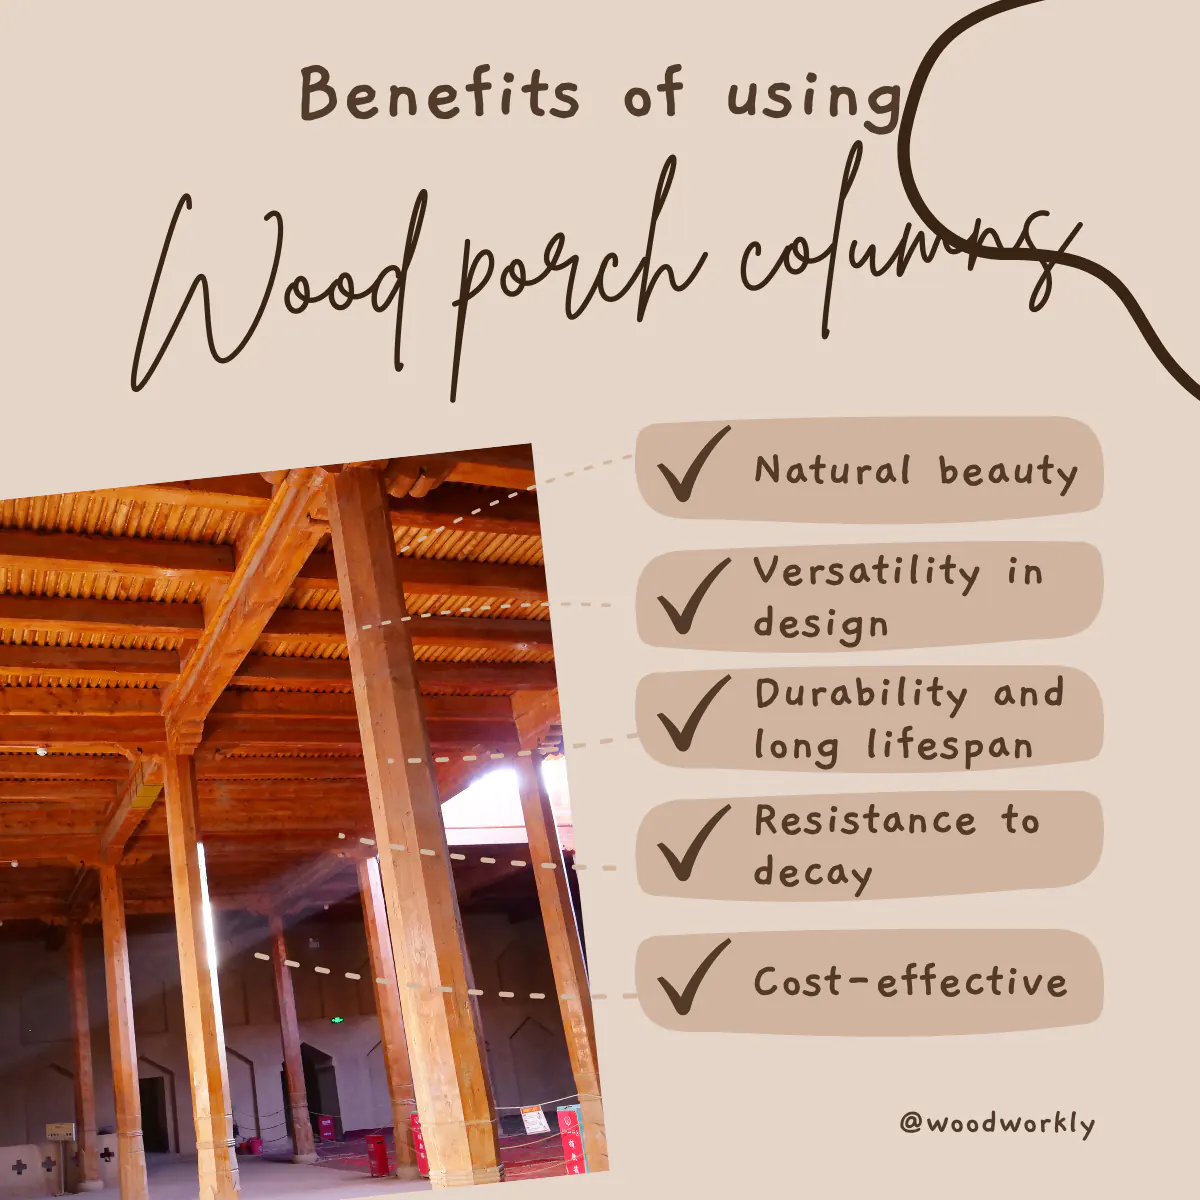 Benefits of using wood for exterior columns